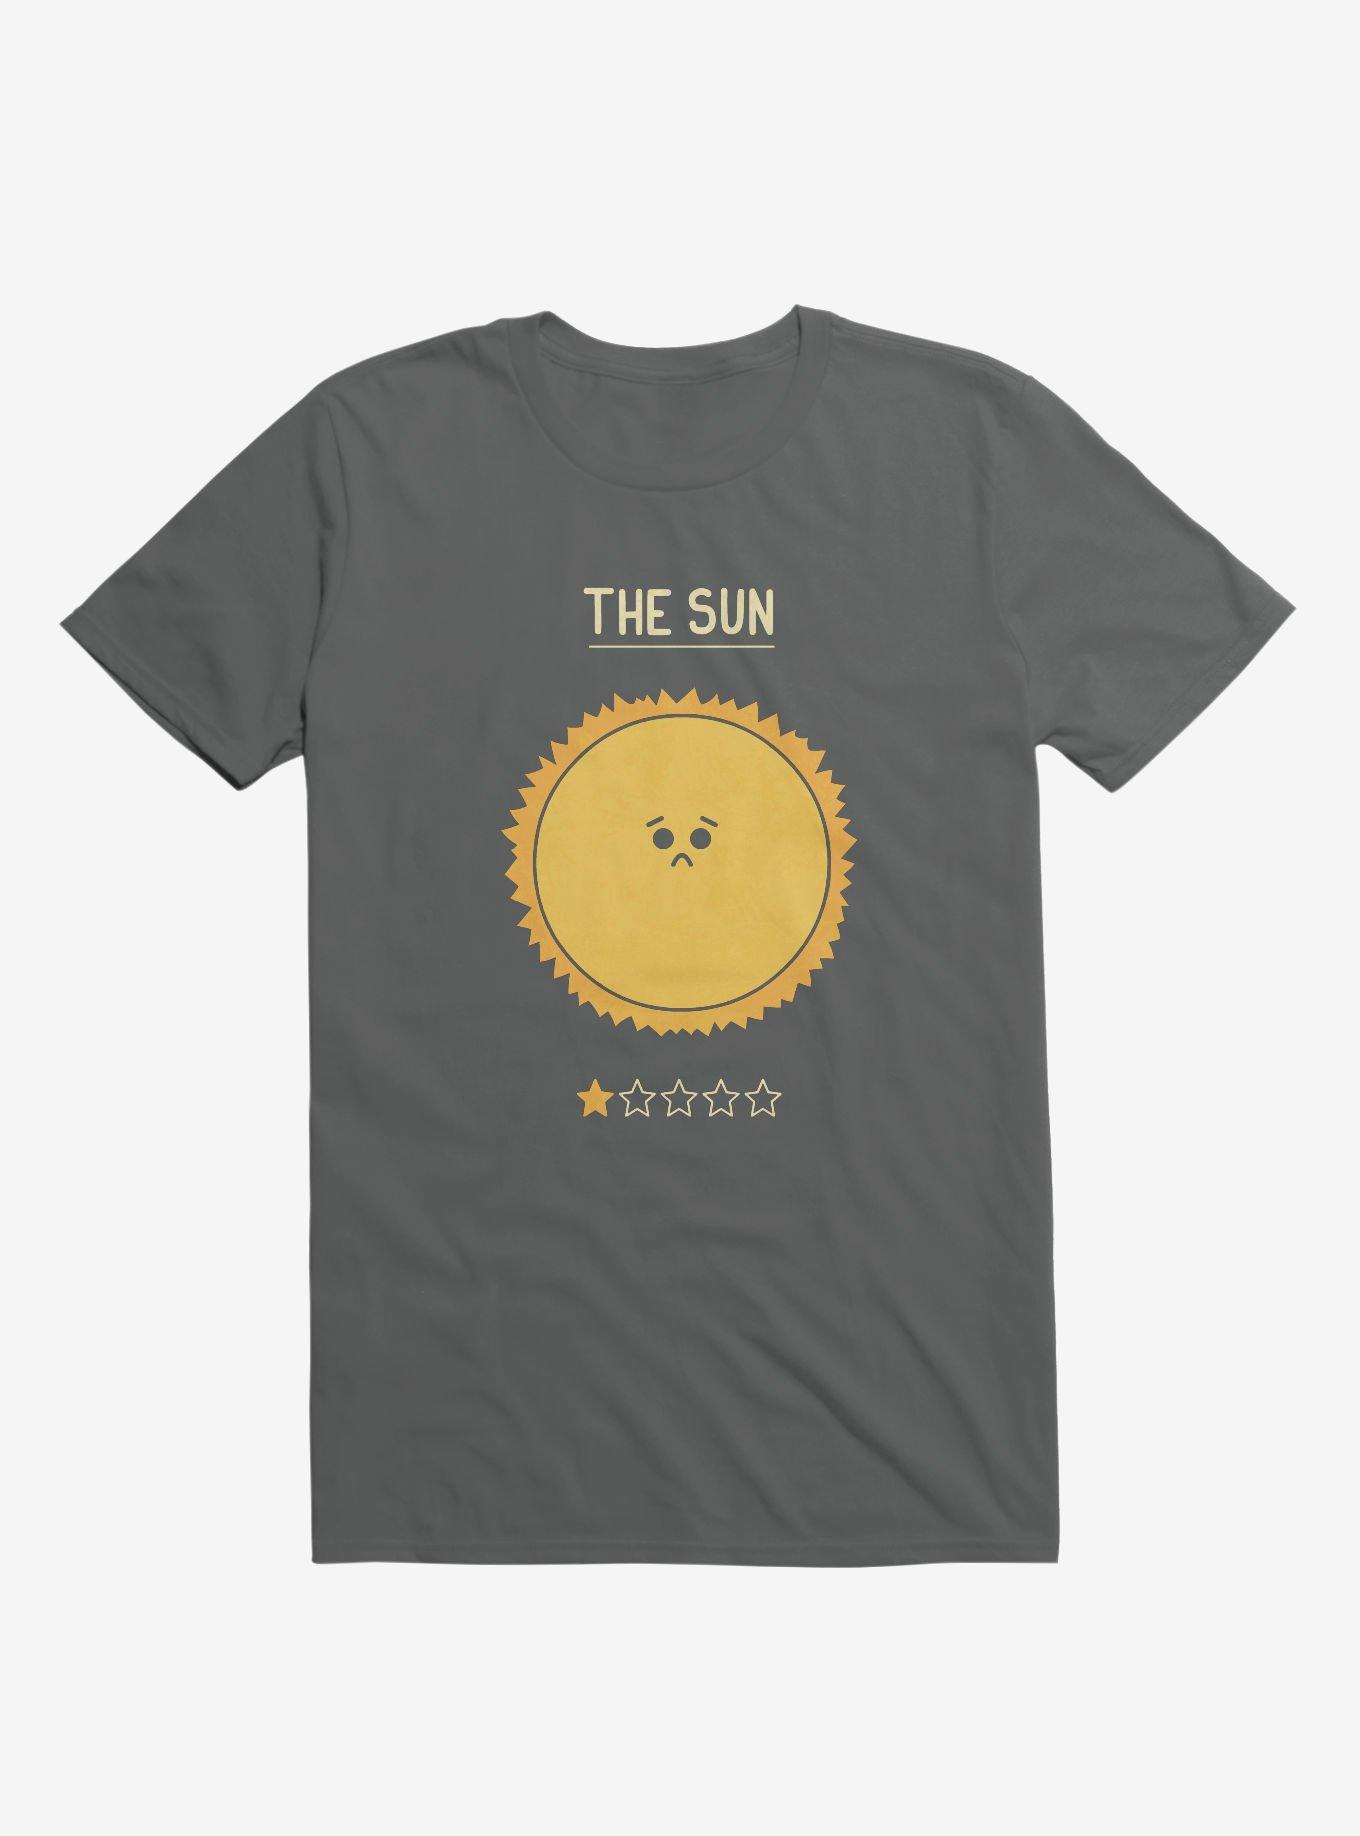 The Sun One Star Rating Charcoal Grey T-Shirt